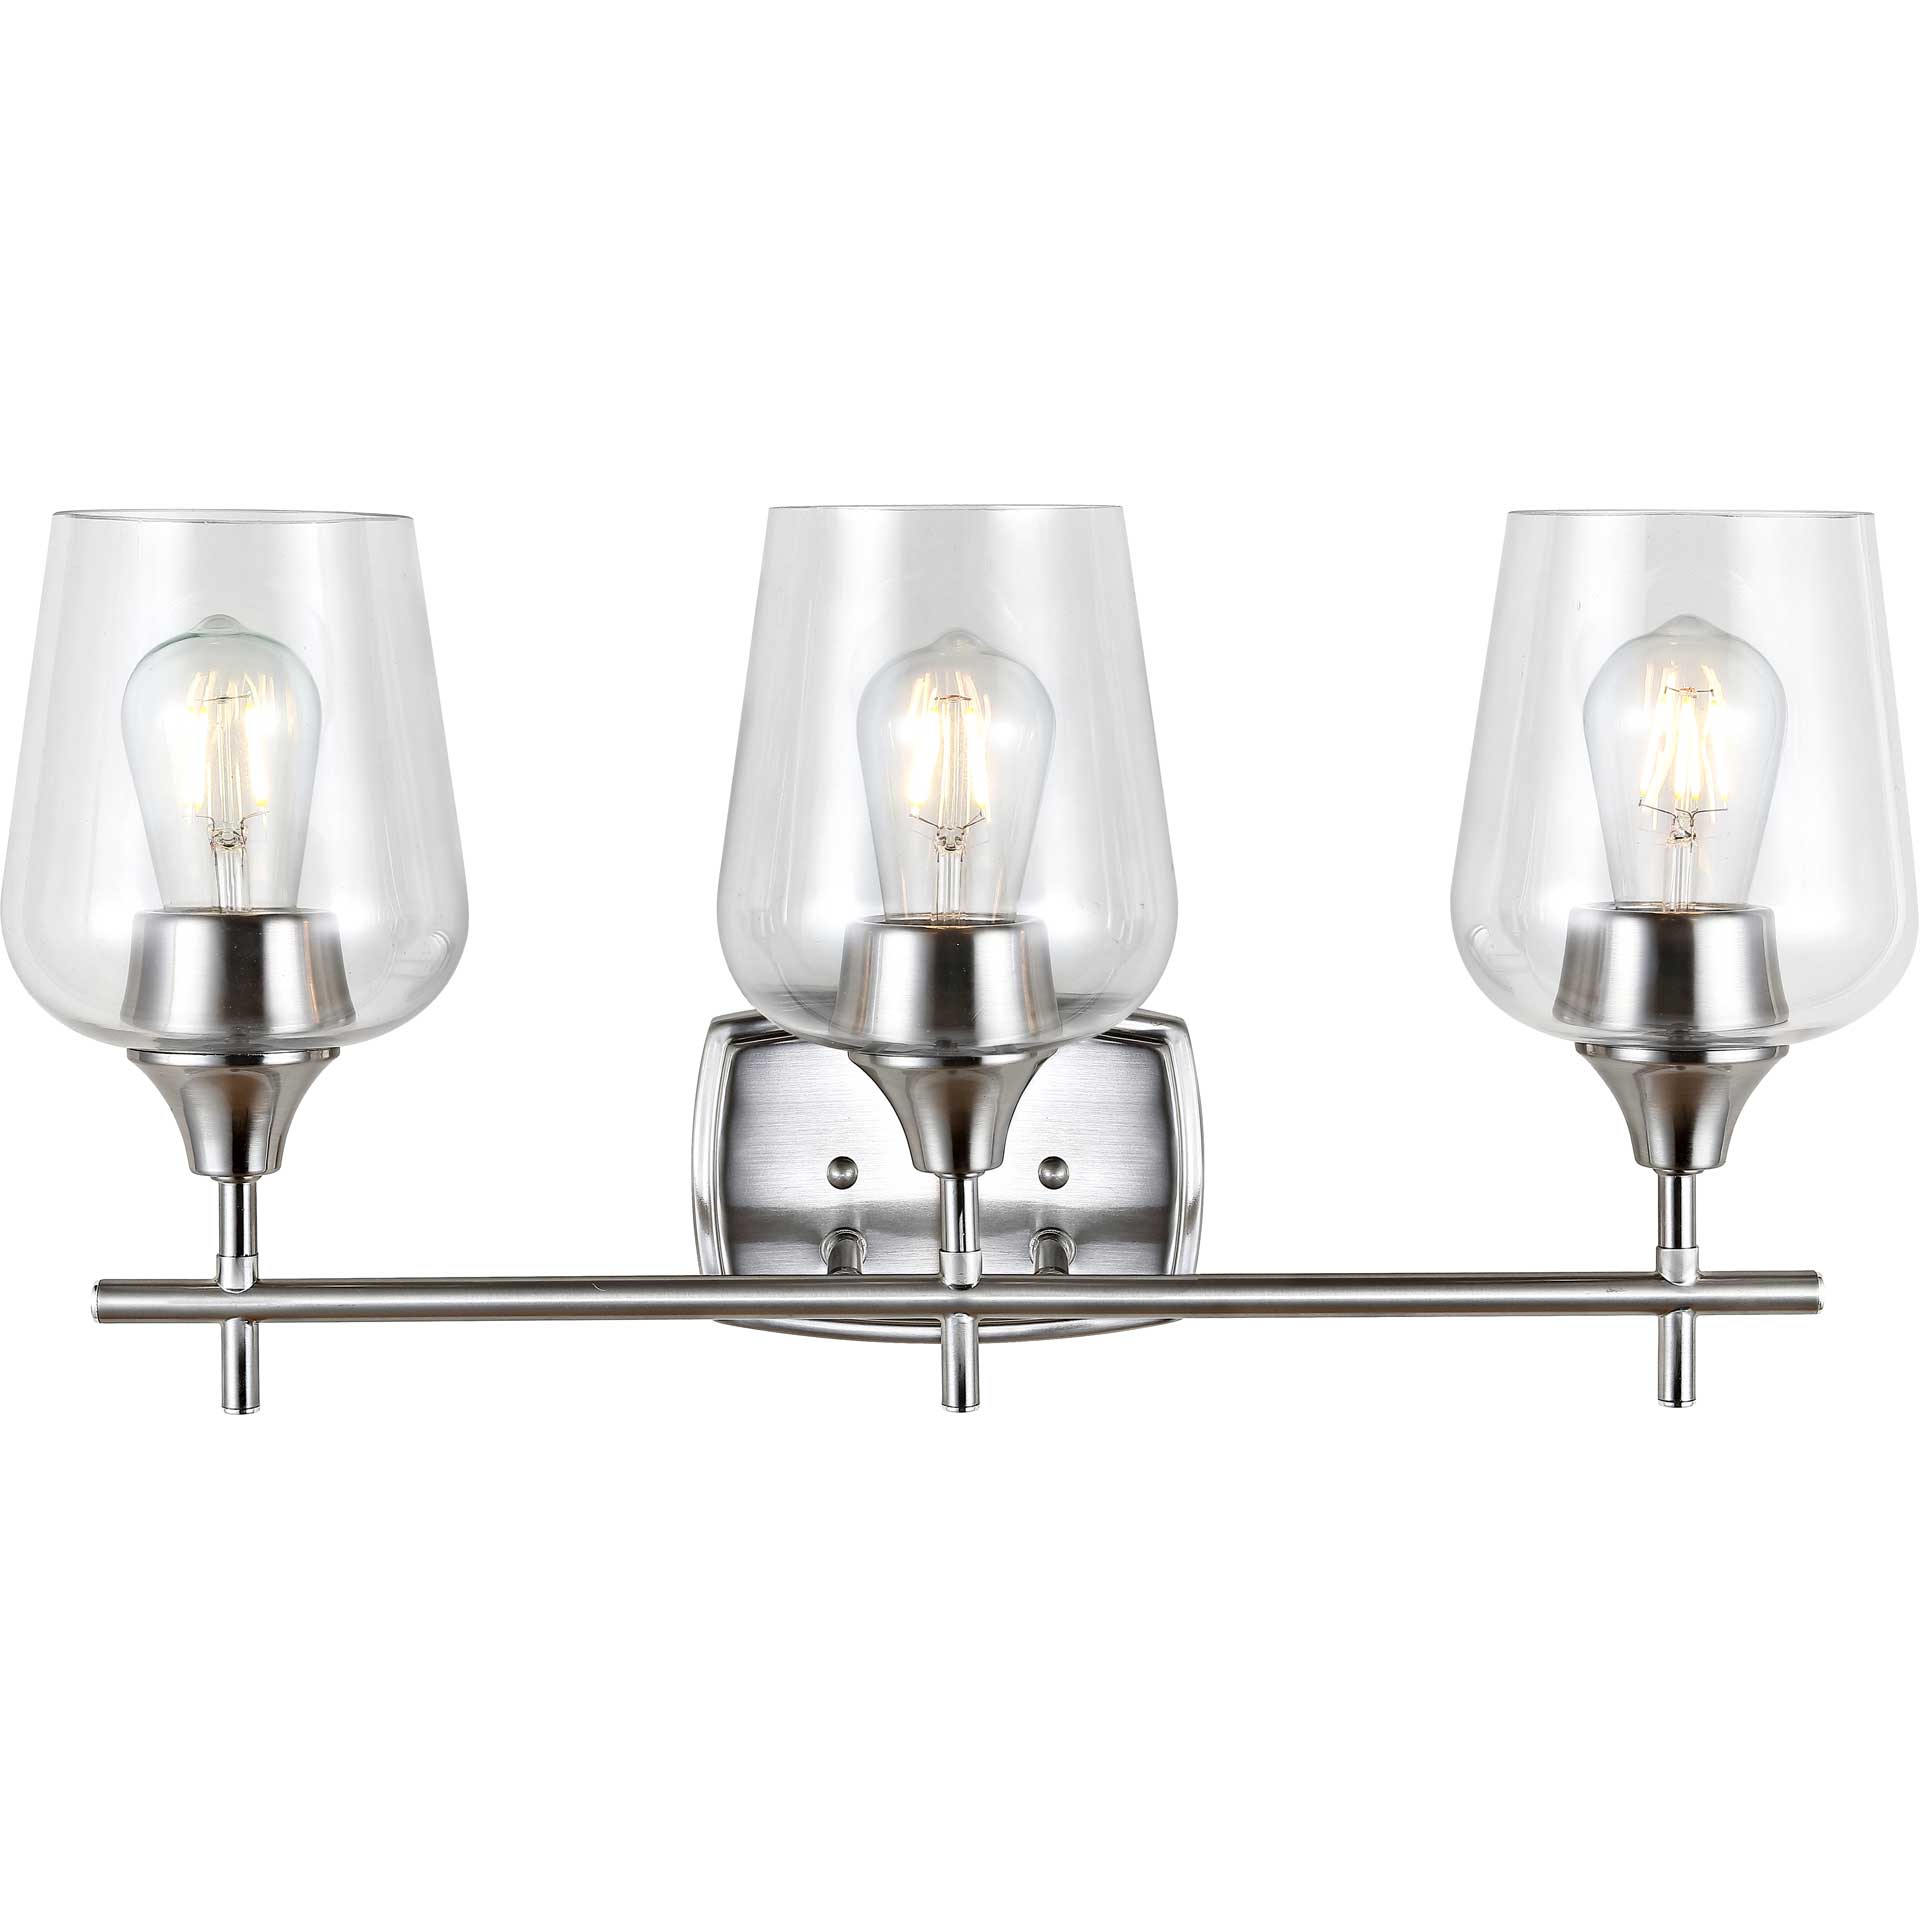 Eason Wall Sconce Nickel/Clear